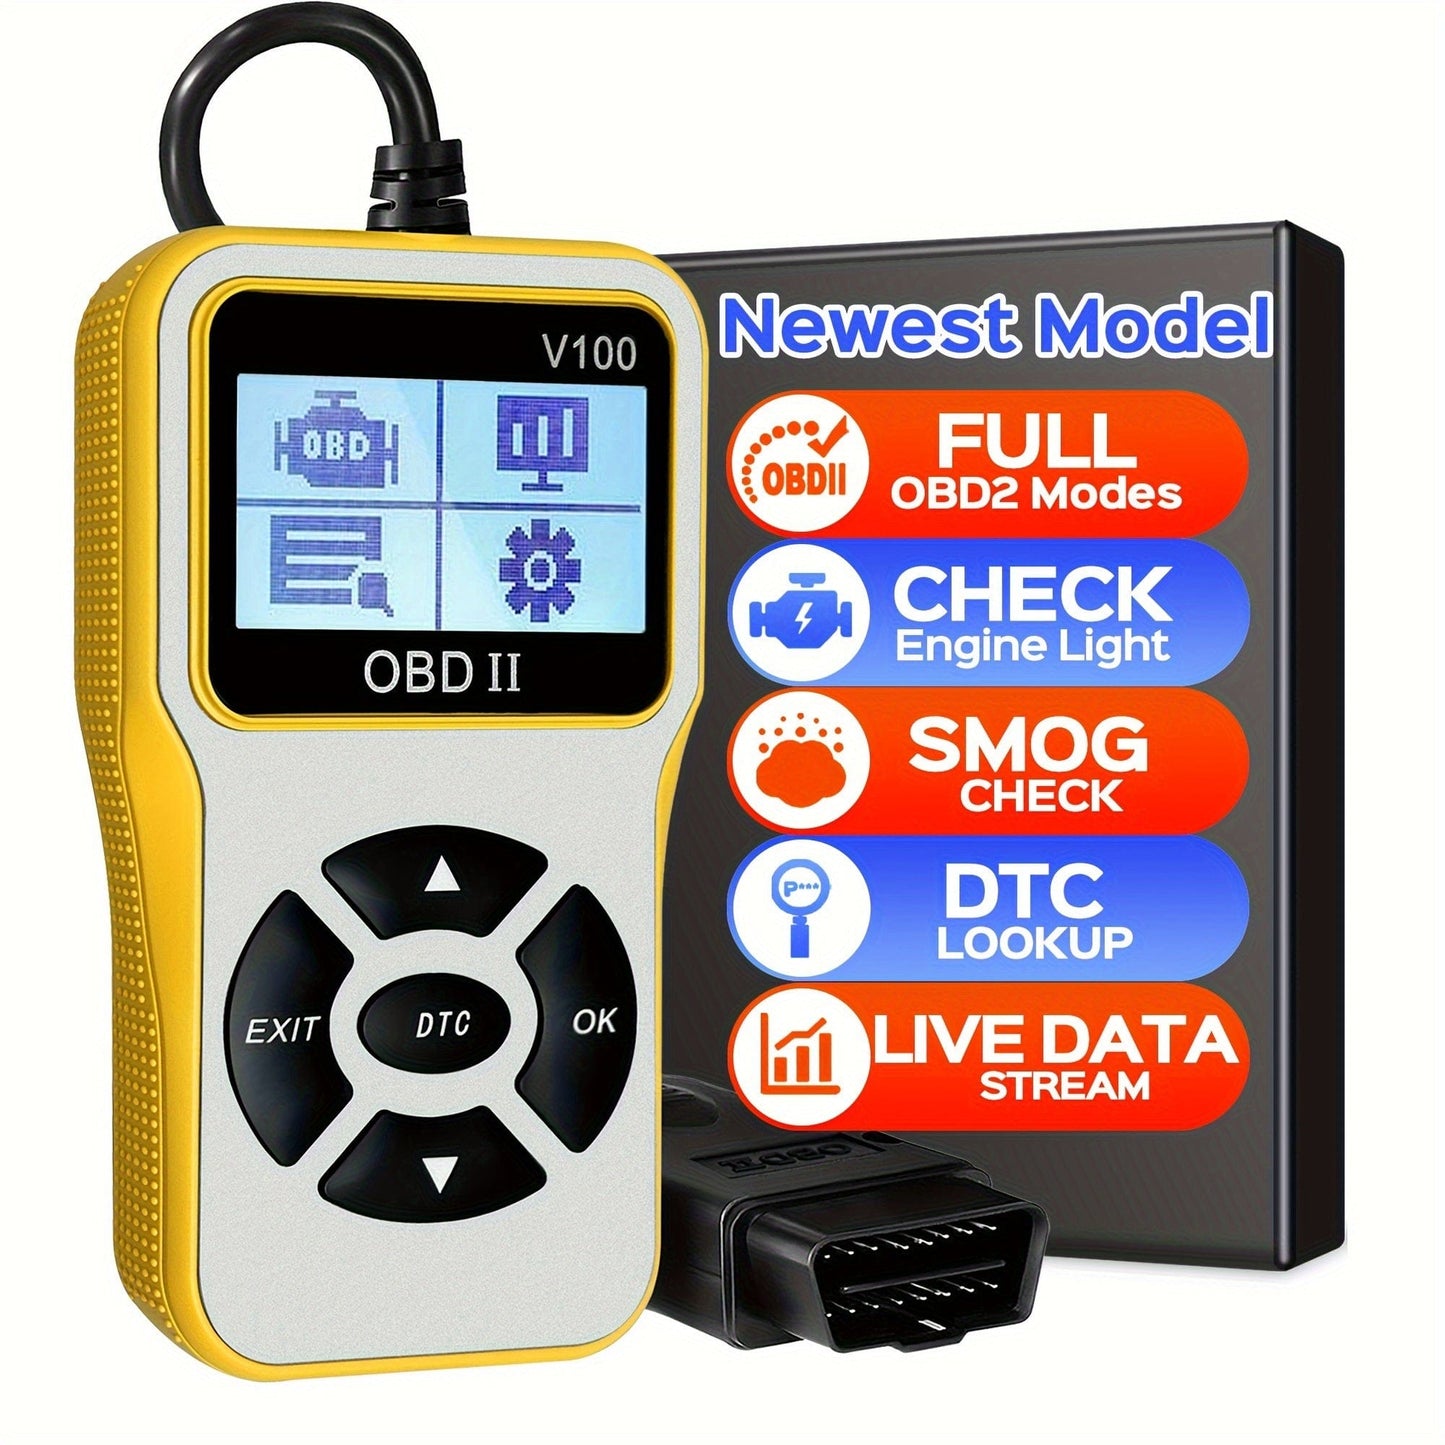 Car OBD2 Scanner Professional Code Reader Vehicle Check Engine Fault Scanner Auto CAN Diagnostic Scan Tool For All OBDII Protocol Cars Since 1996